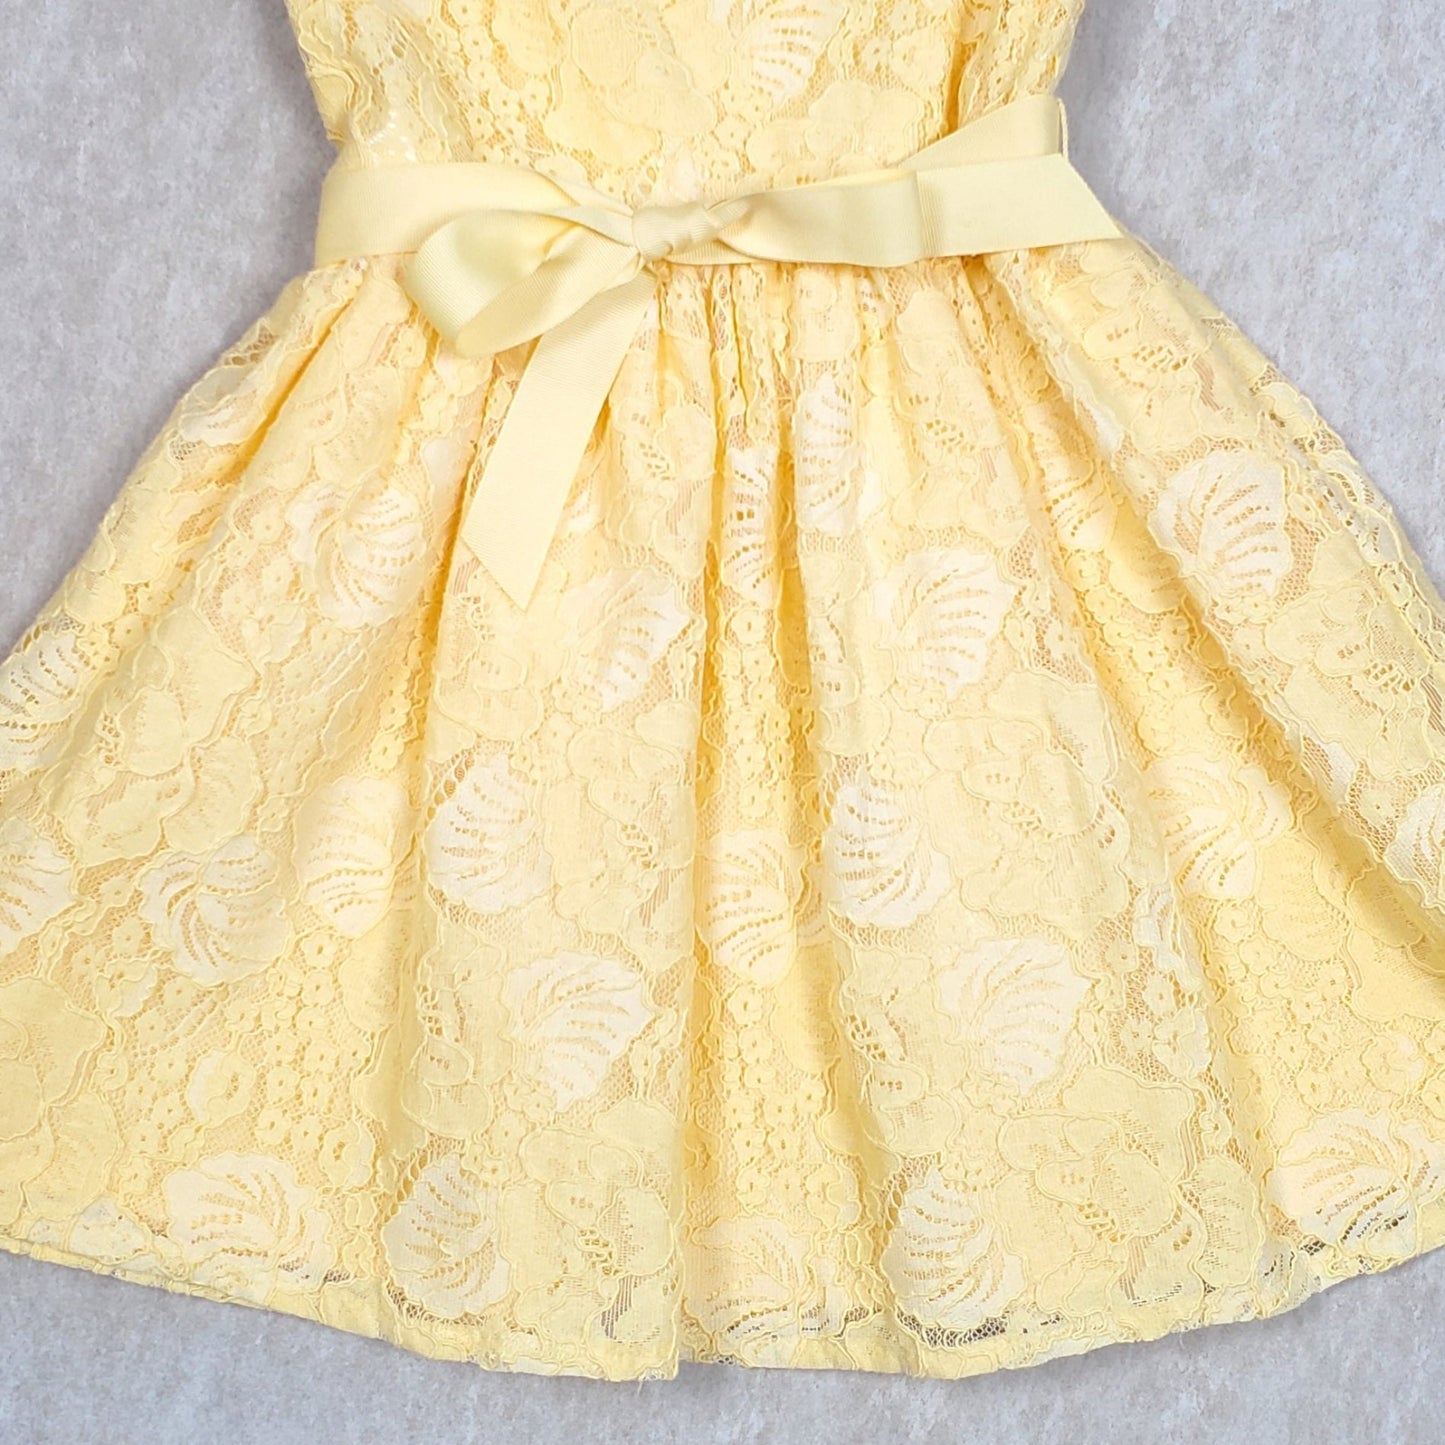 Childrens Place Girls Yellow Lace Dress 5T NWOT, close-up details